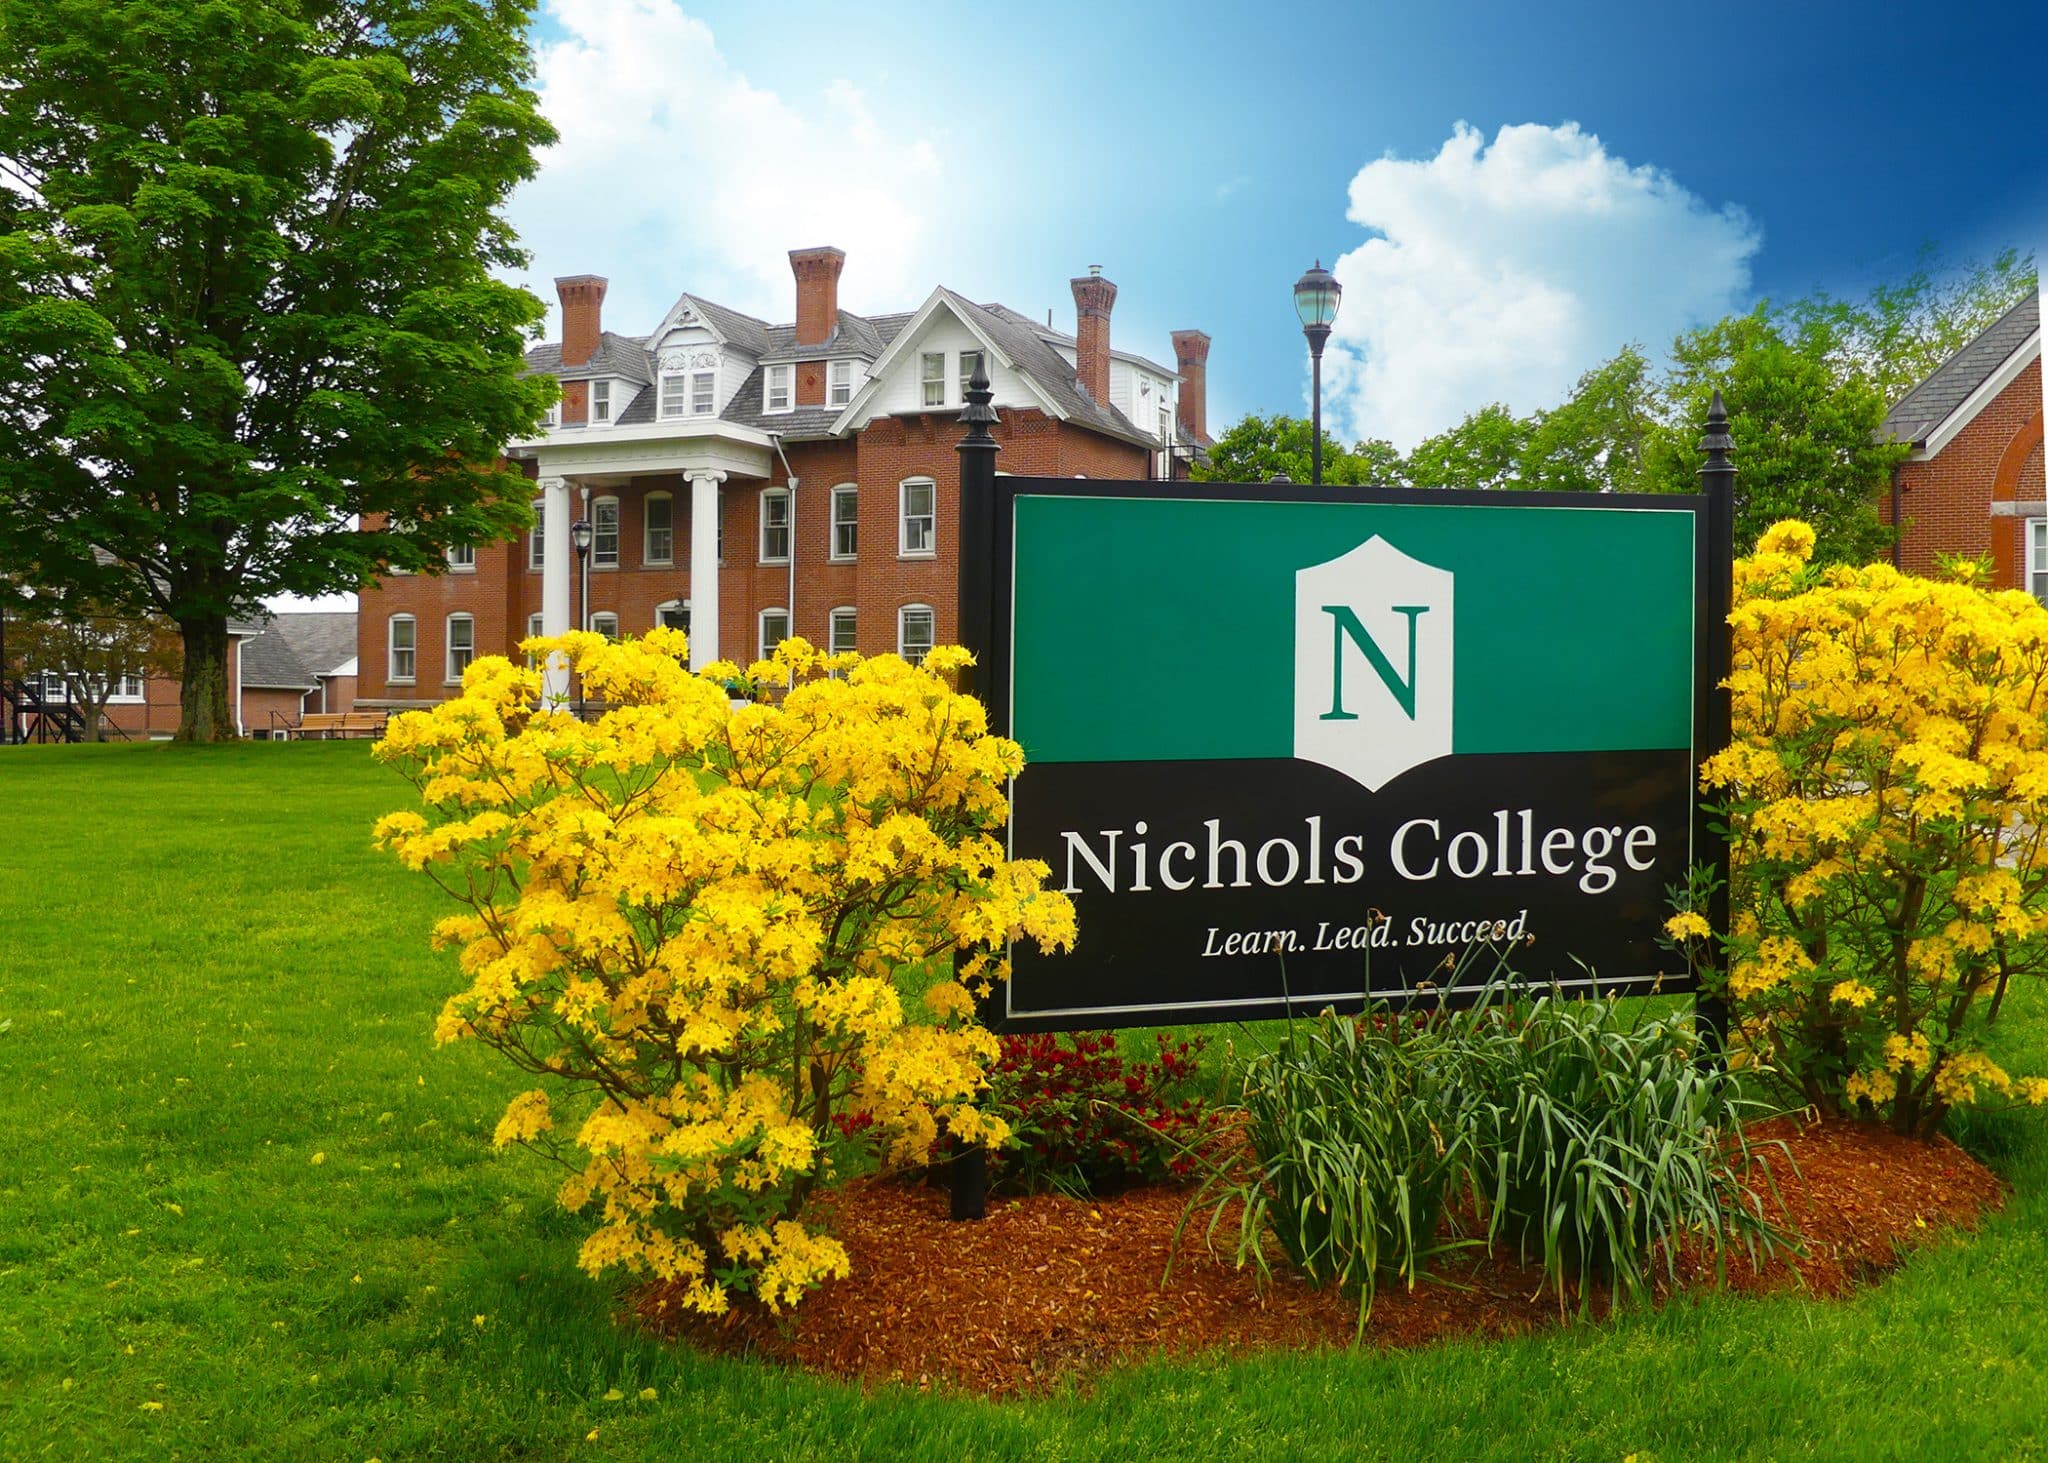 US News & World Report Best Colleges rankings recognizes Nichols College